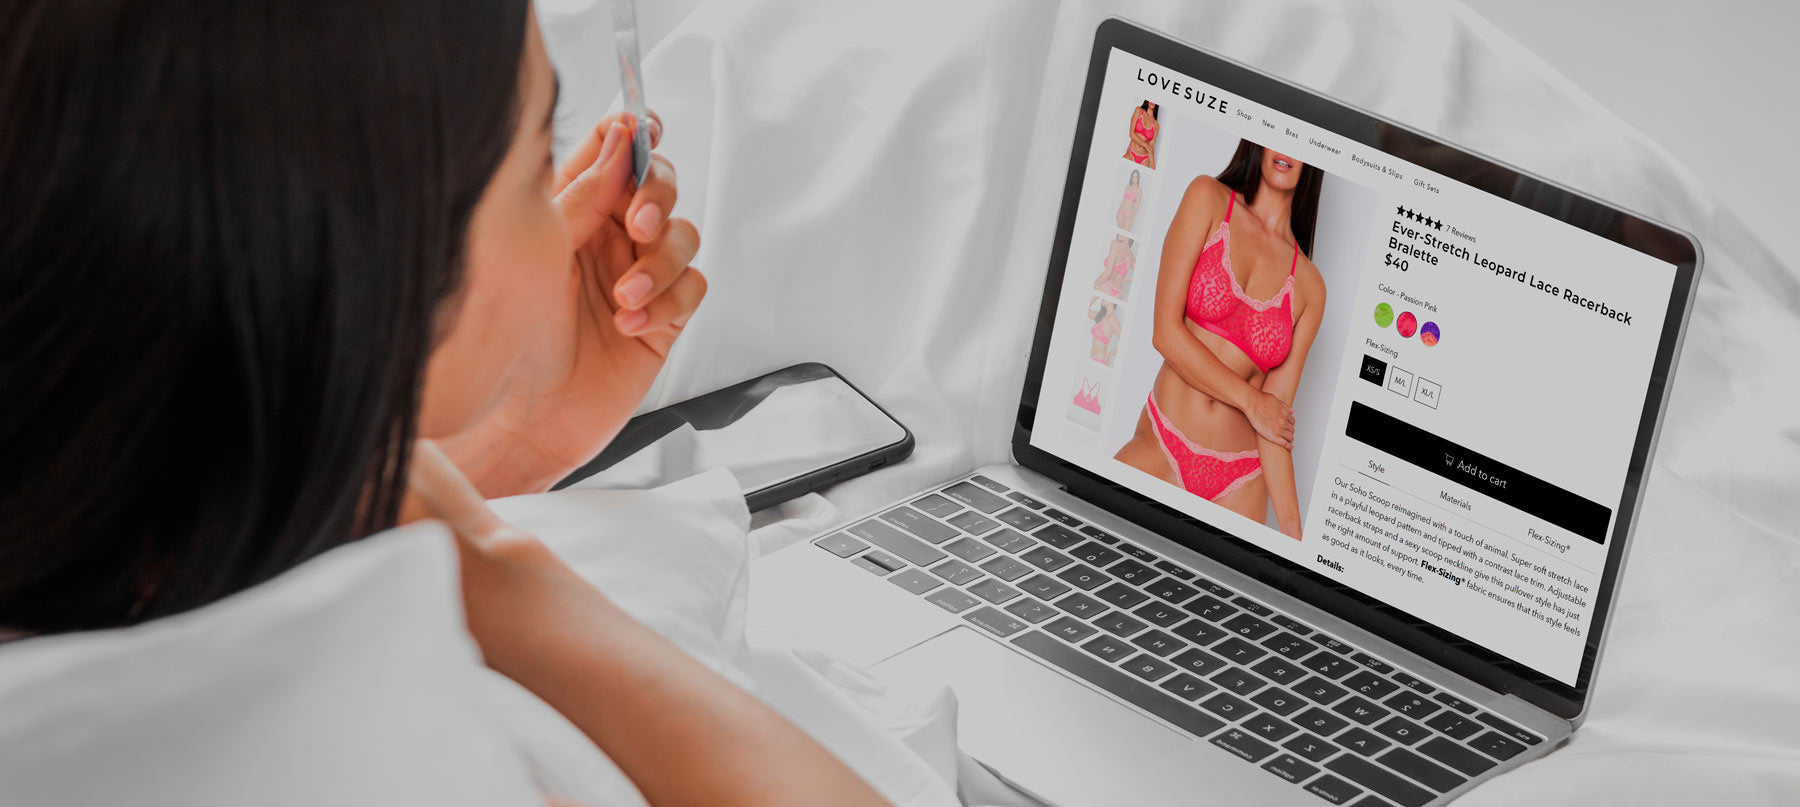 LoveSuze LoveNotes Blog Buying Lingerie Online? Here’s How to Get Your Size Right the First Time